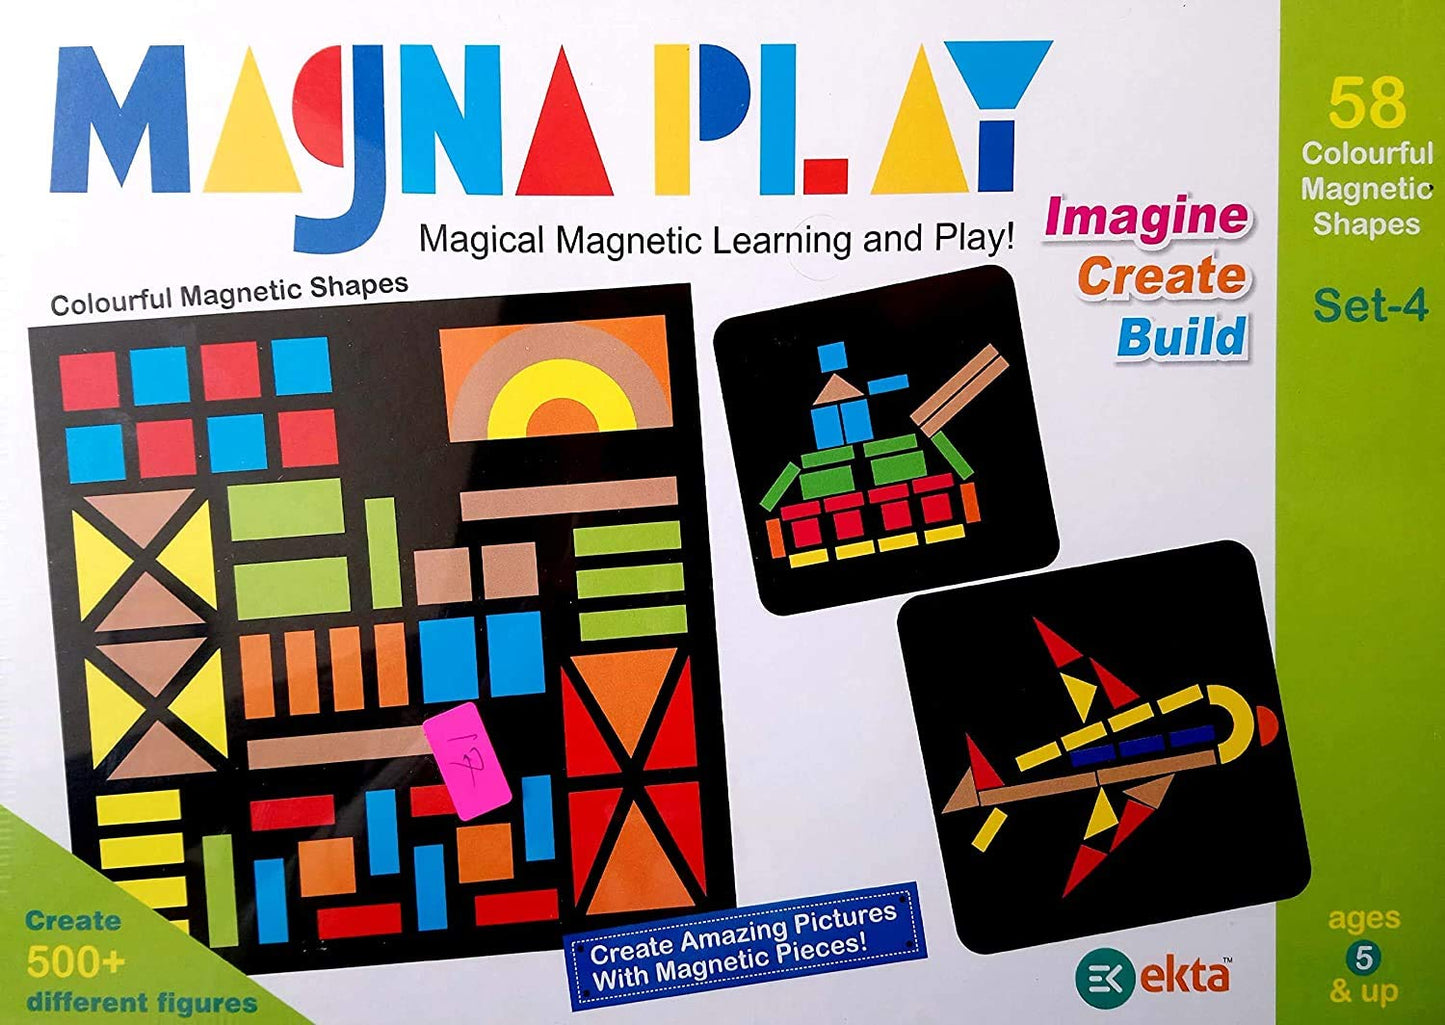  Megna Play: ShapeShift - DIY Magnetic Game Set-4 for Kids (5+ years), 500+ Unique Designs, Promotes Creativity, 58 Colorful Magnetic Shapes